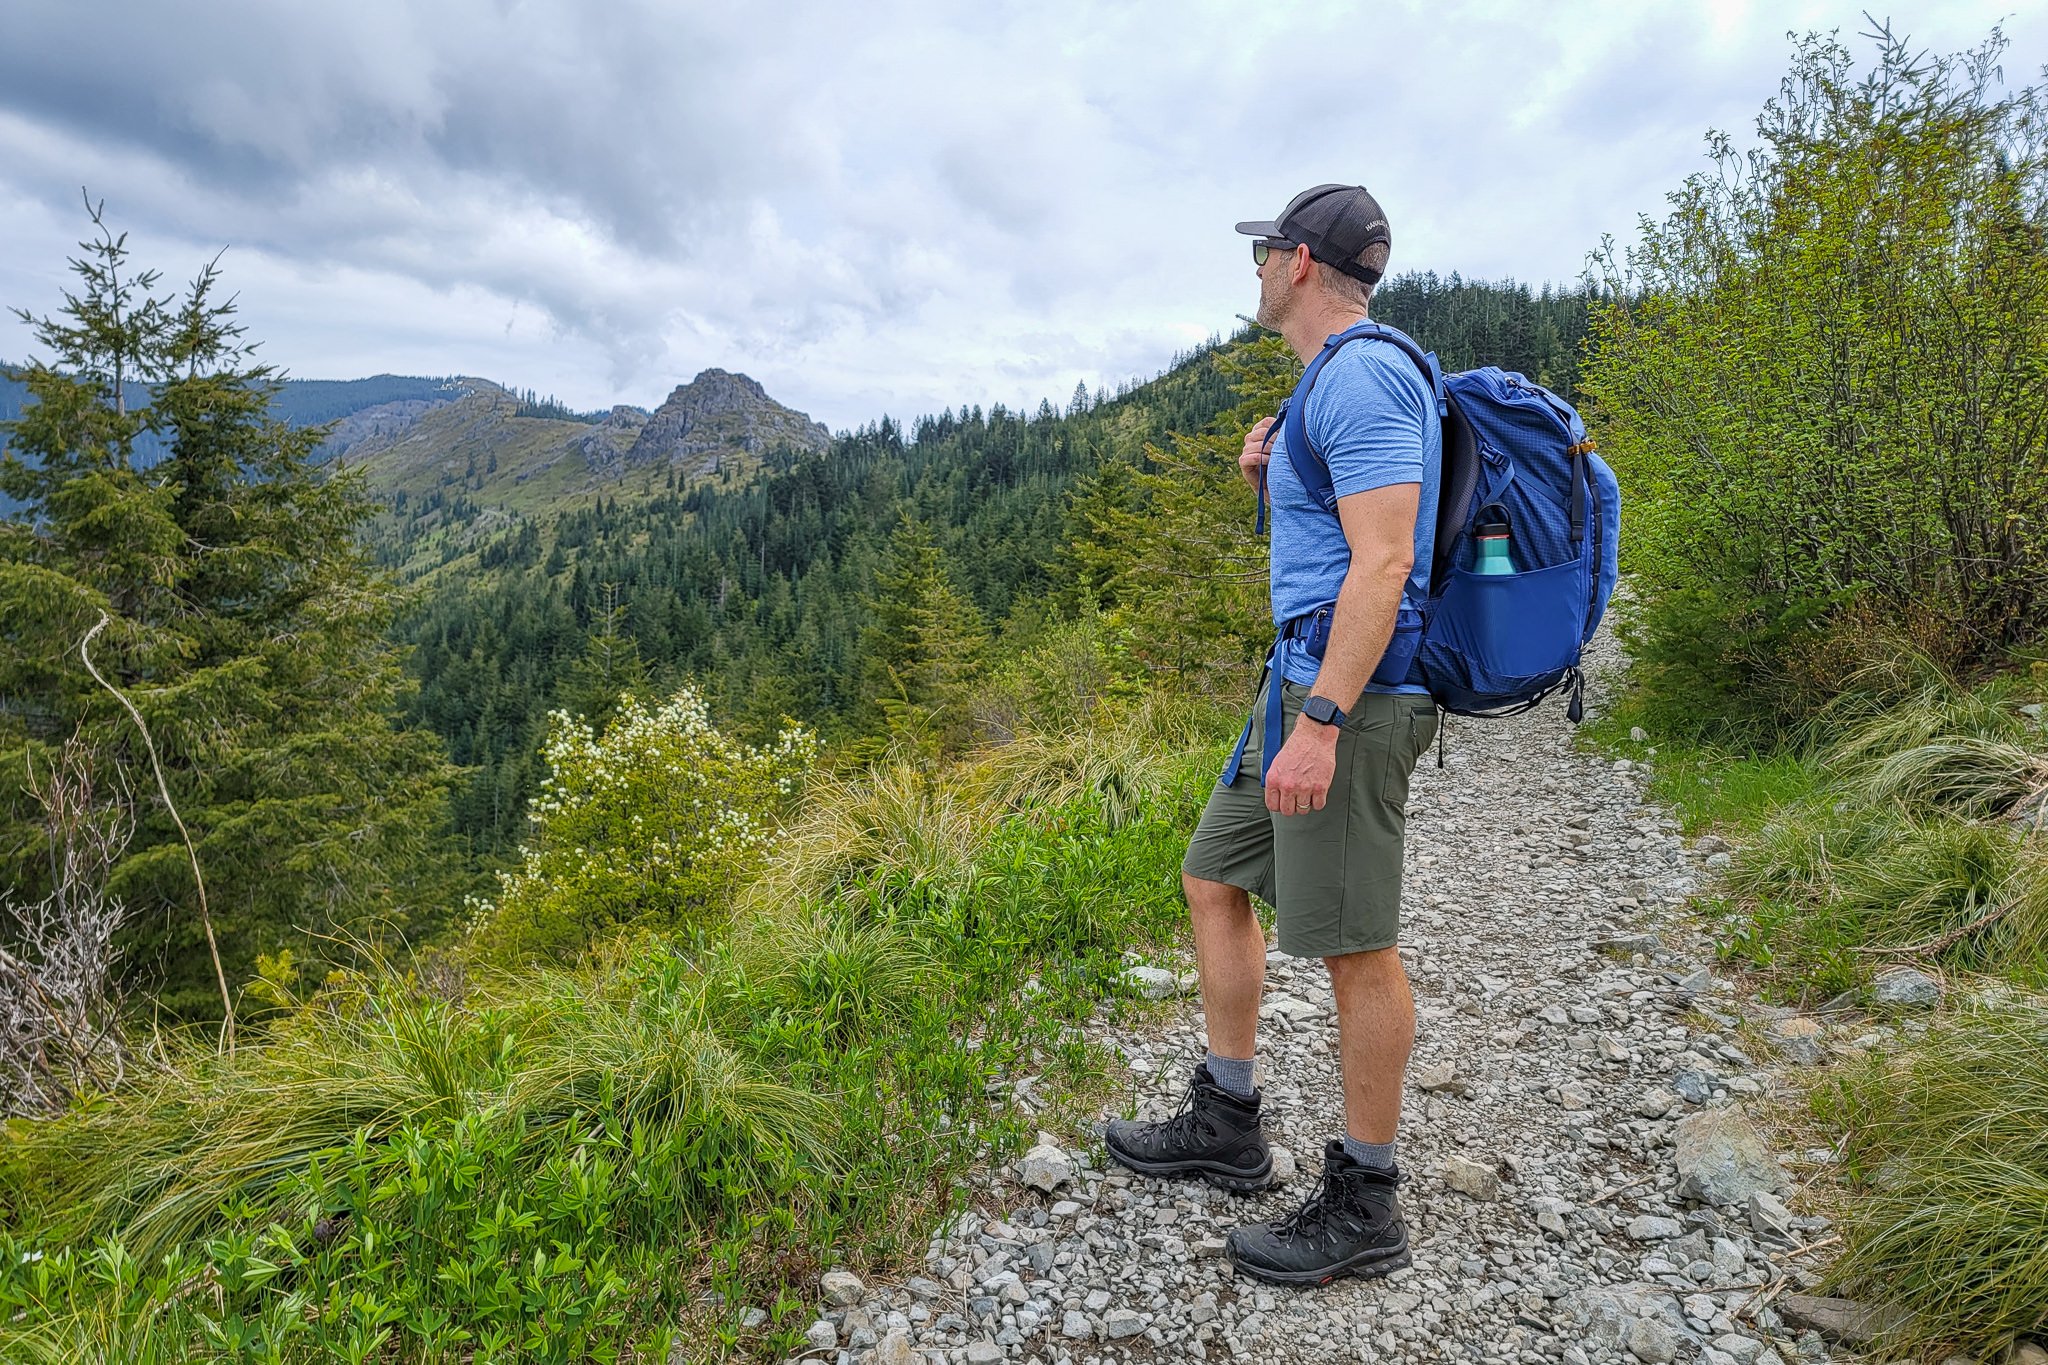 A male hiker standing on a rocky trail wearing the REI Trail 40 backpack looking out at distant mountains under a cloudy sky